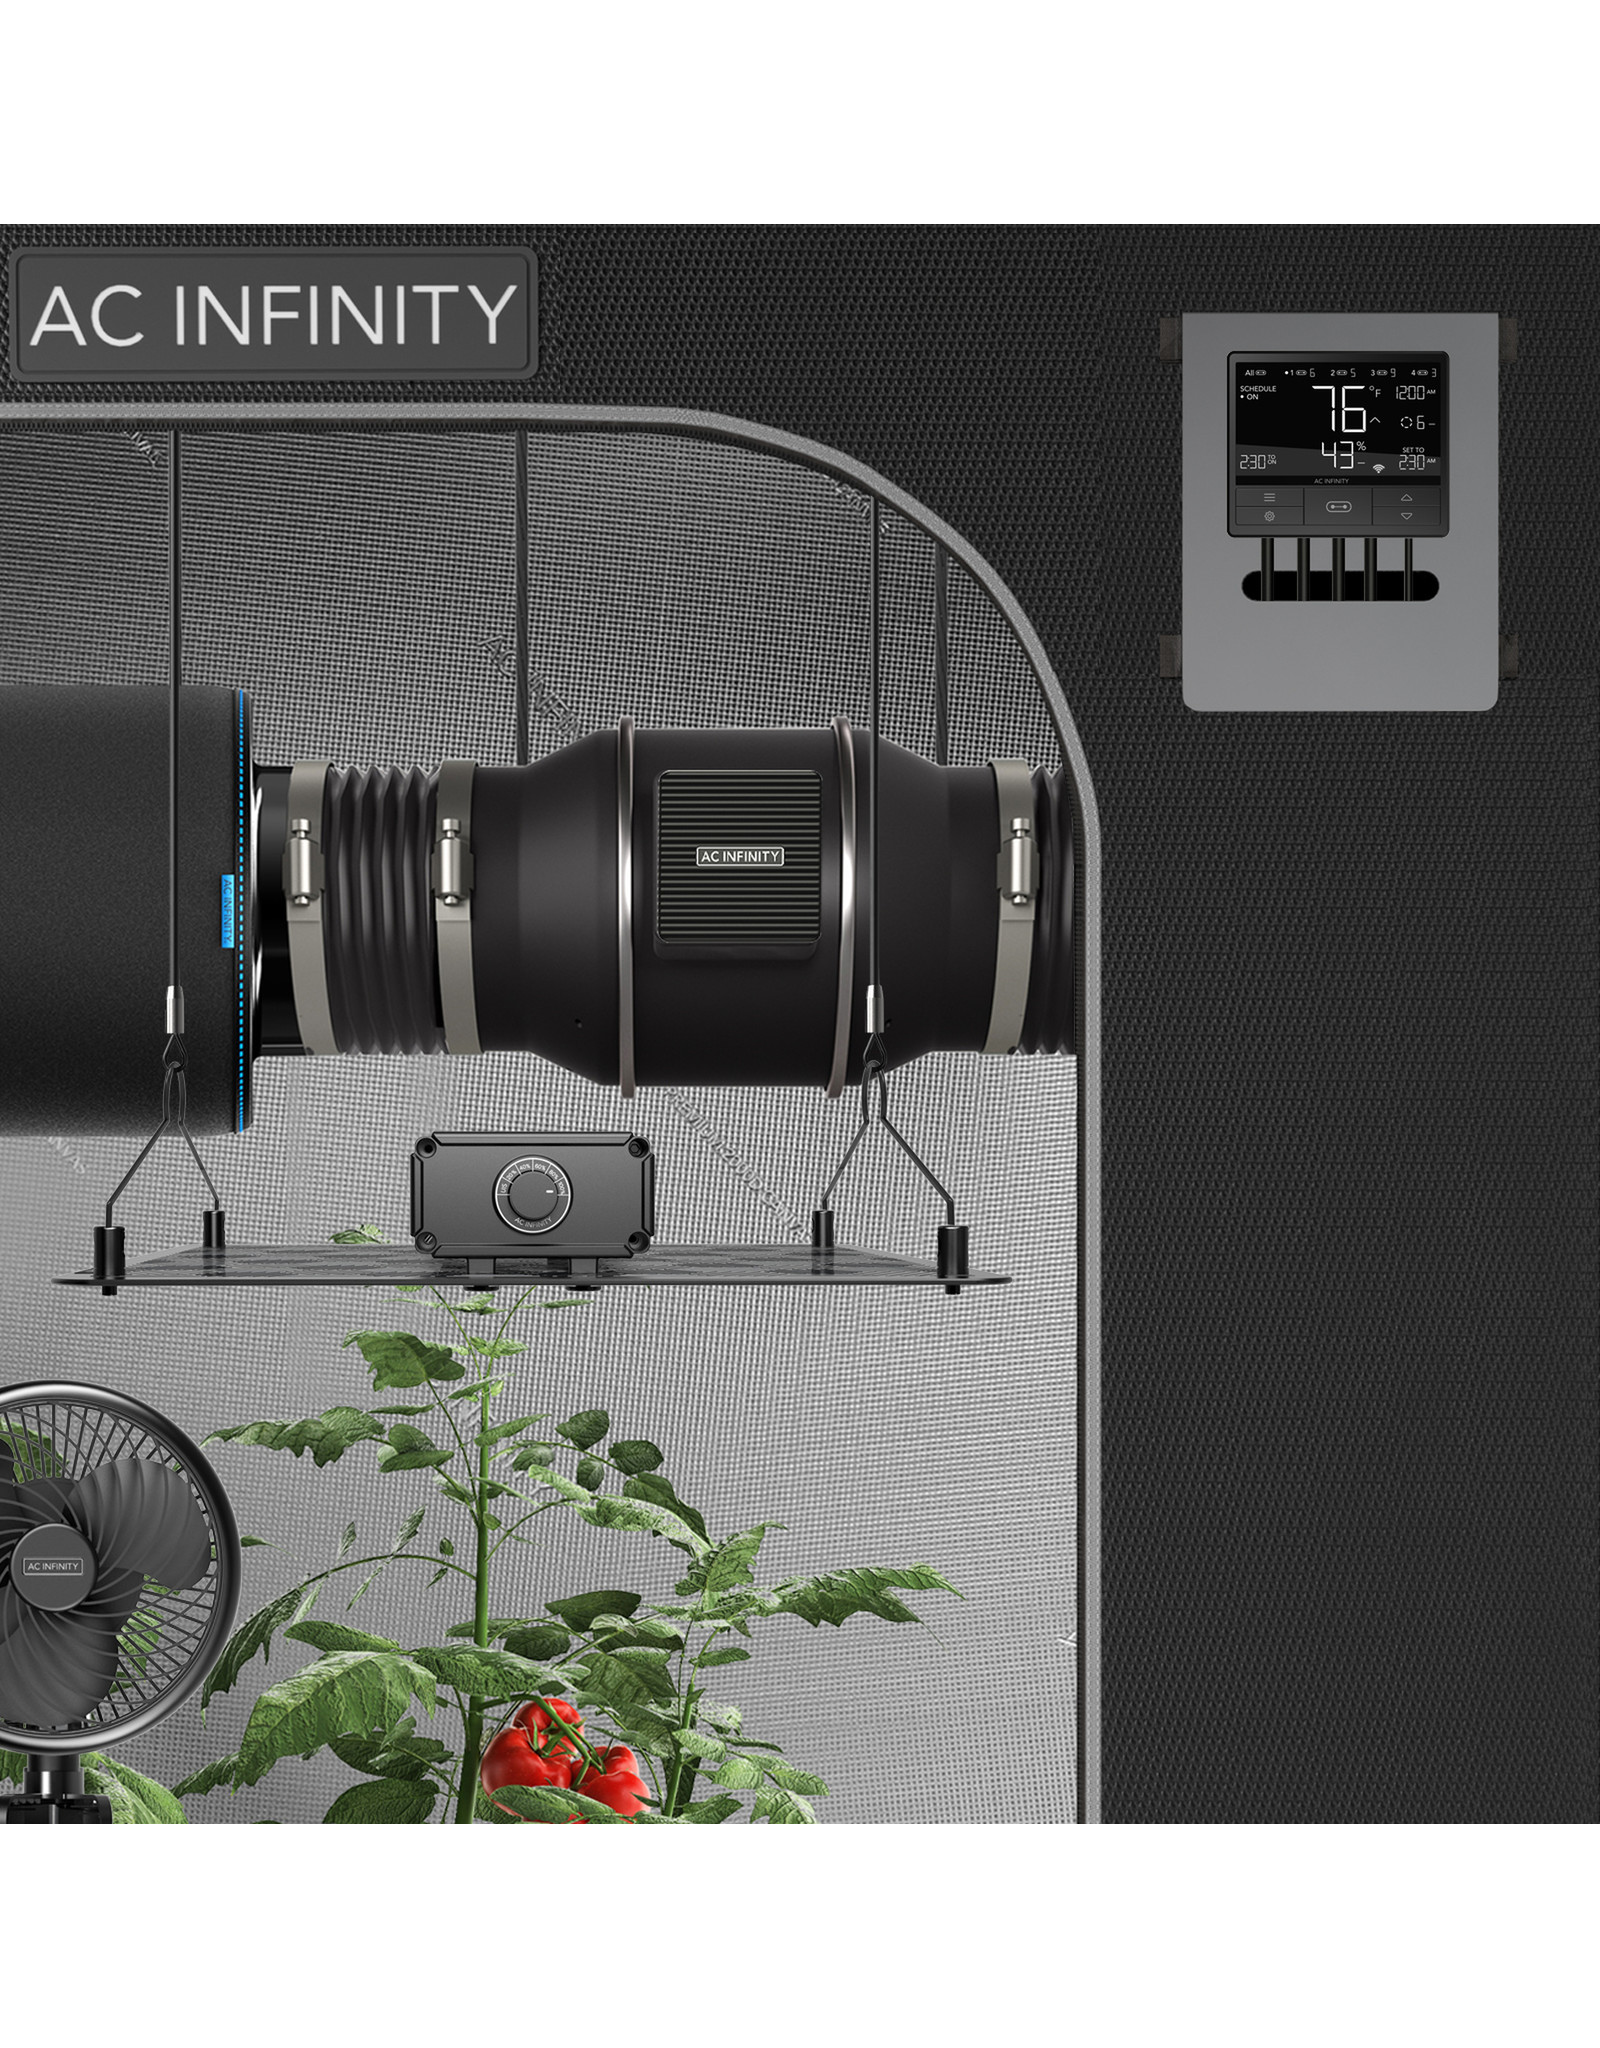 AC Infinity Controller 69 WiFi ONLY Dynamic Temperature, Humidity, Scheduling and Cycle Control w/ Data App